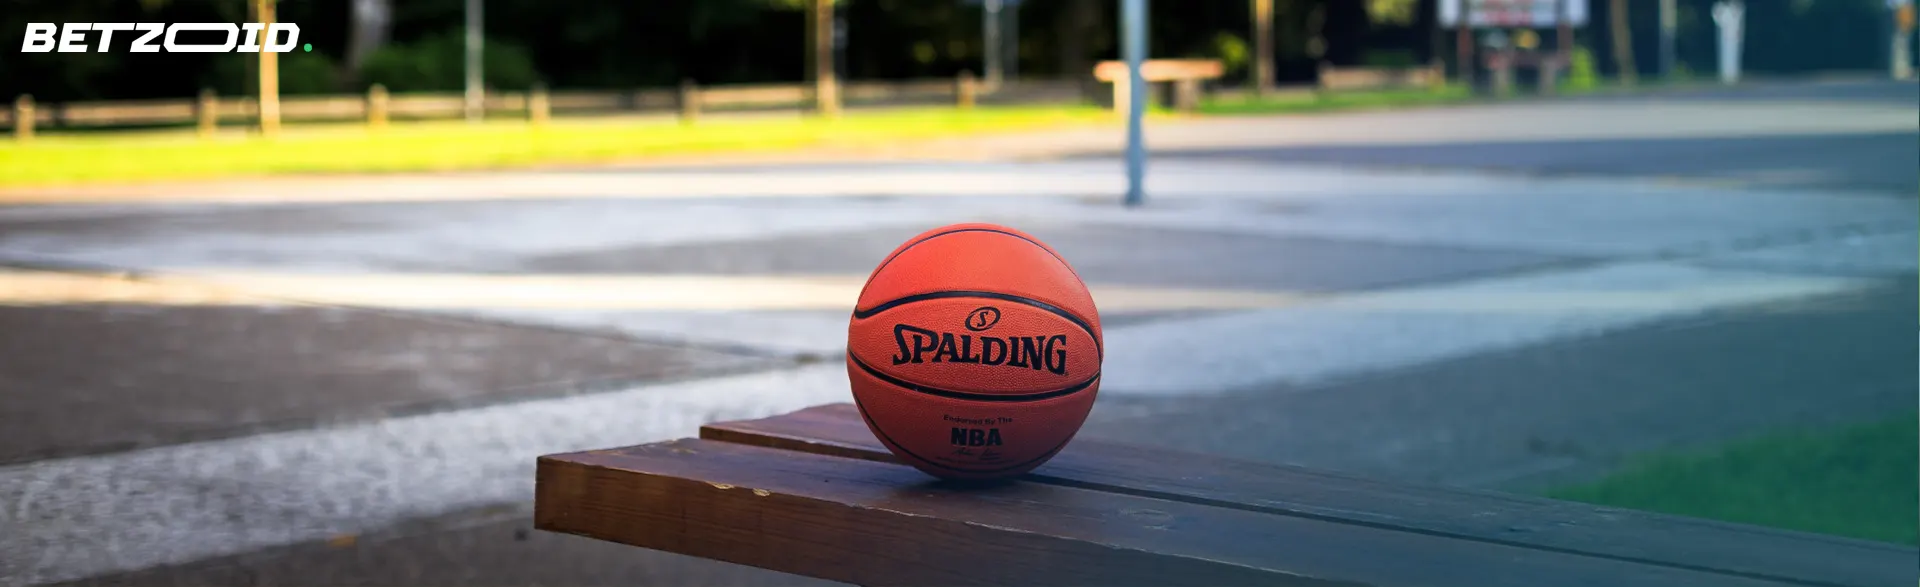 The image shows basketball resting on a wooden bench.